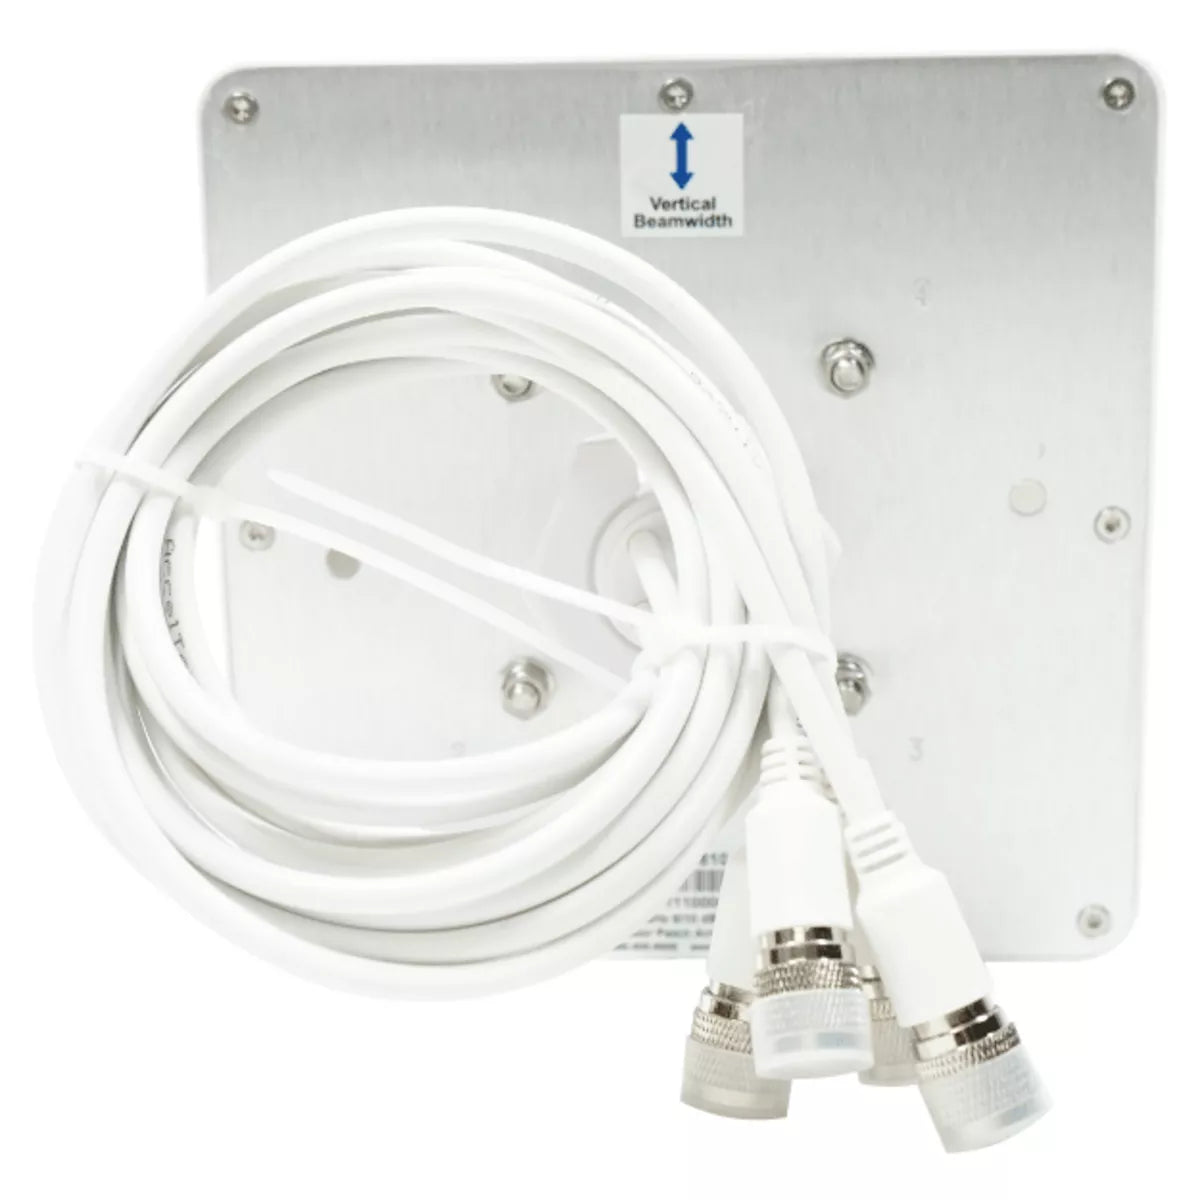 ATS-OP-245-810-Back-1_1200 Acceltex 2.4/5 GHz 8/10 dBi 4 Element Indoor/Outdoor Patch Antenna with N-Style V2 Wi-Fi Antennas acceltex acceltex antennas acceltex patch antenna acceltex solutions wifi antennen wlan antennen